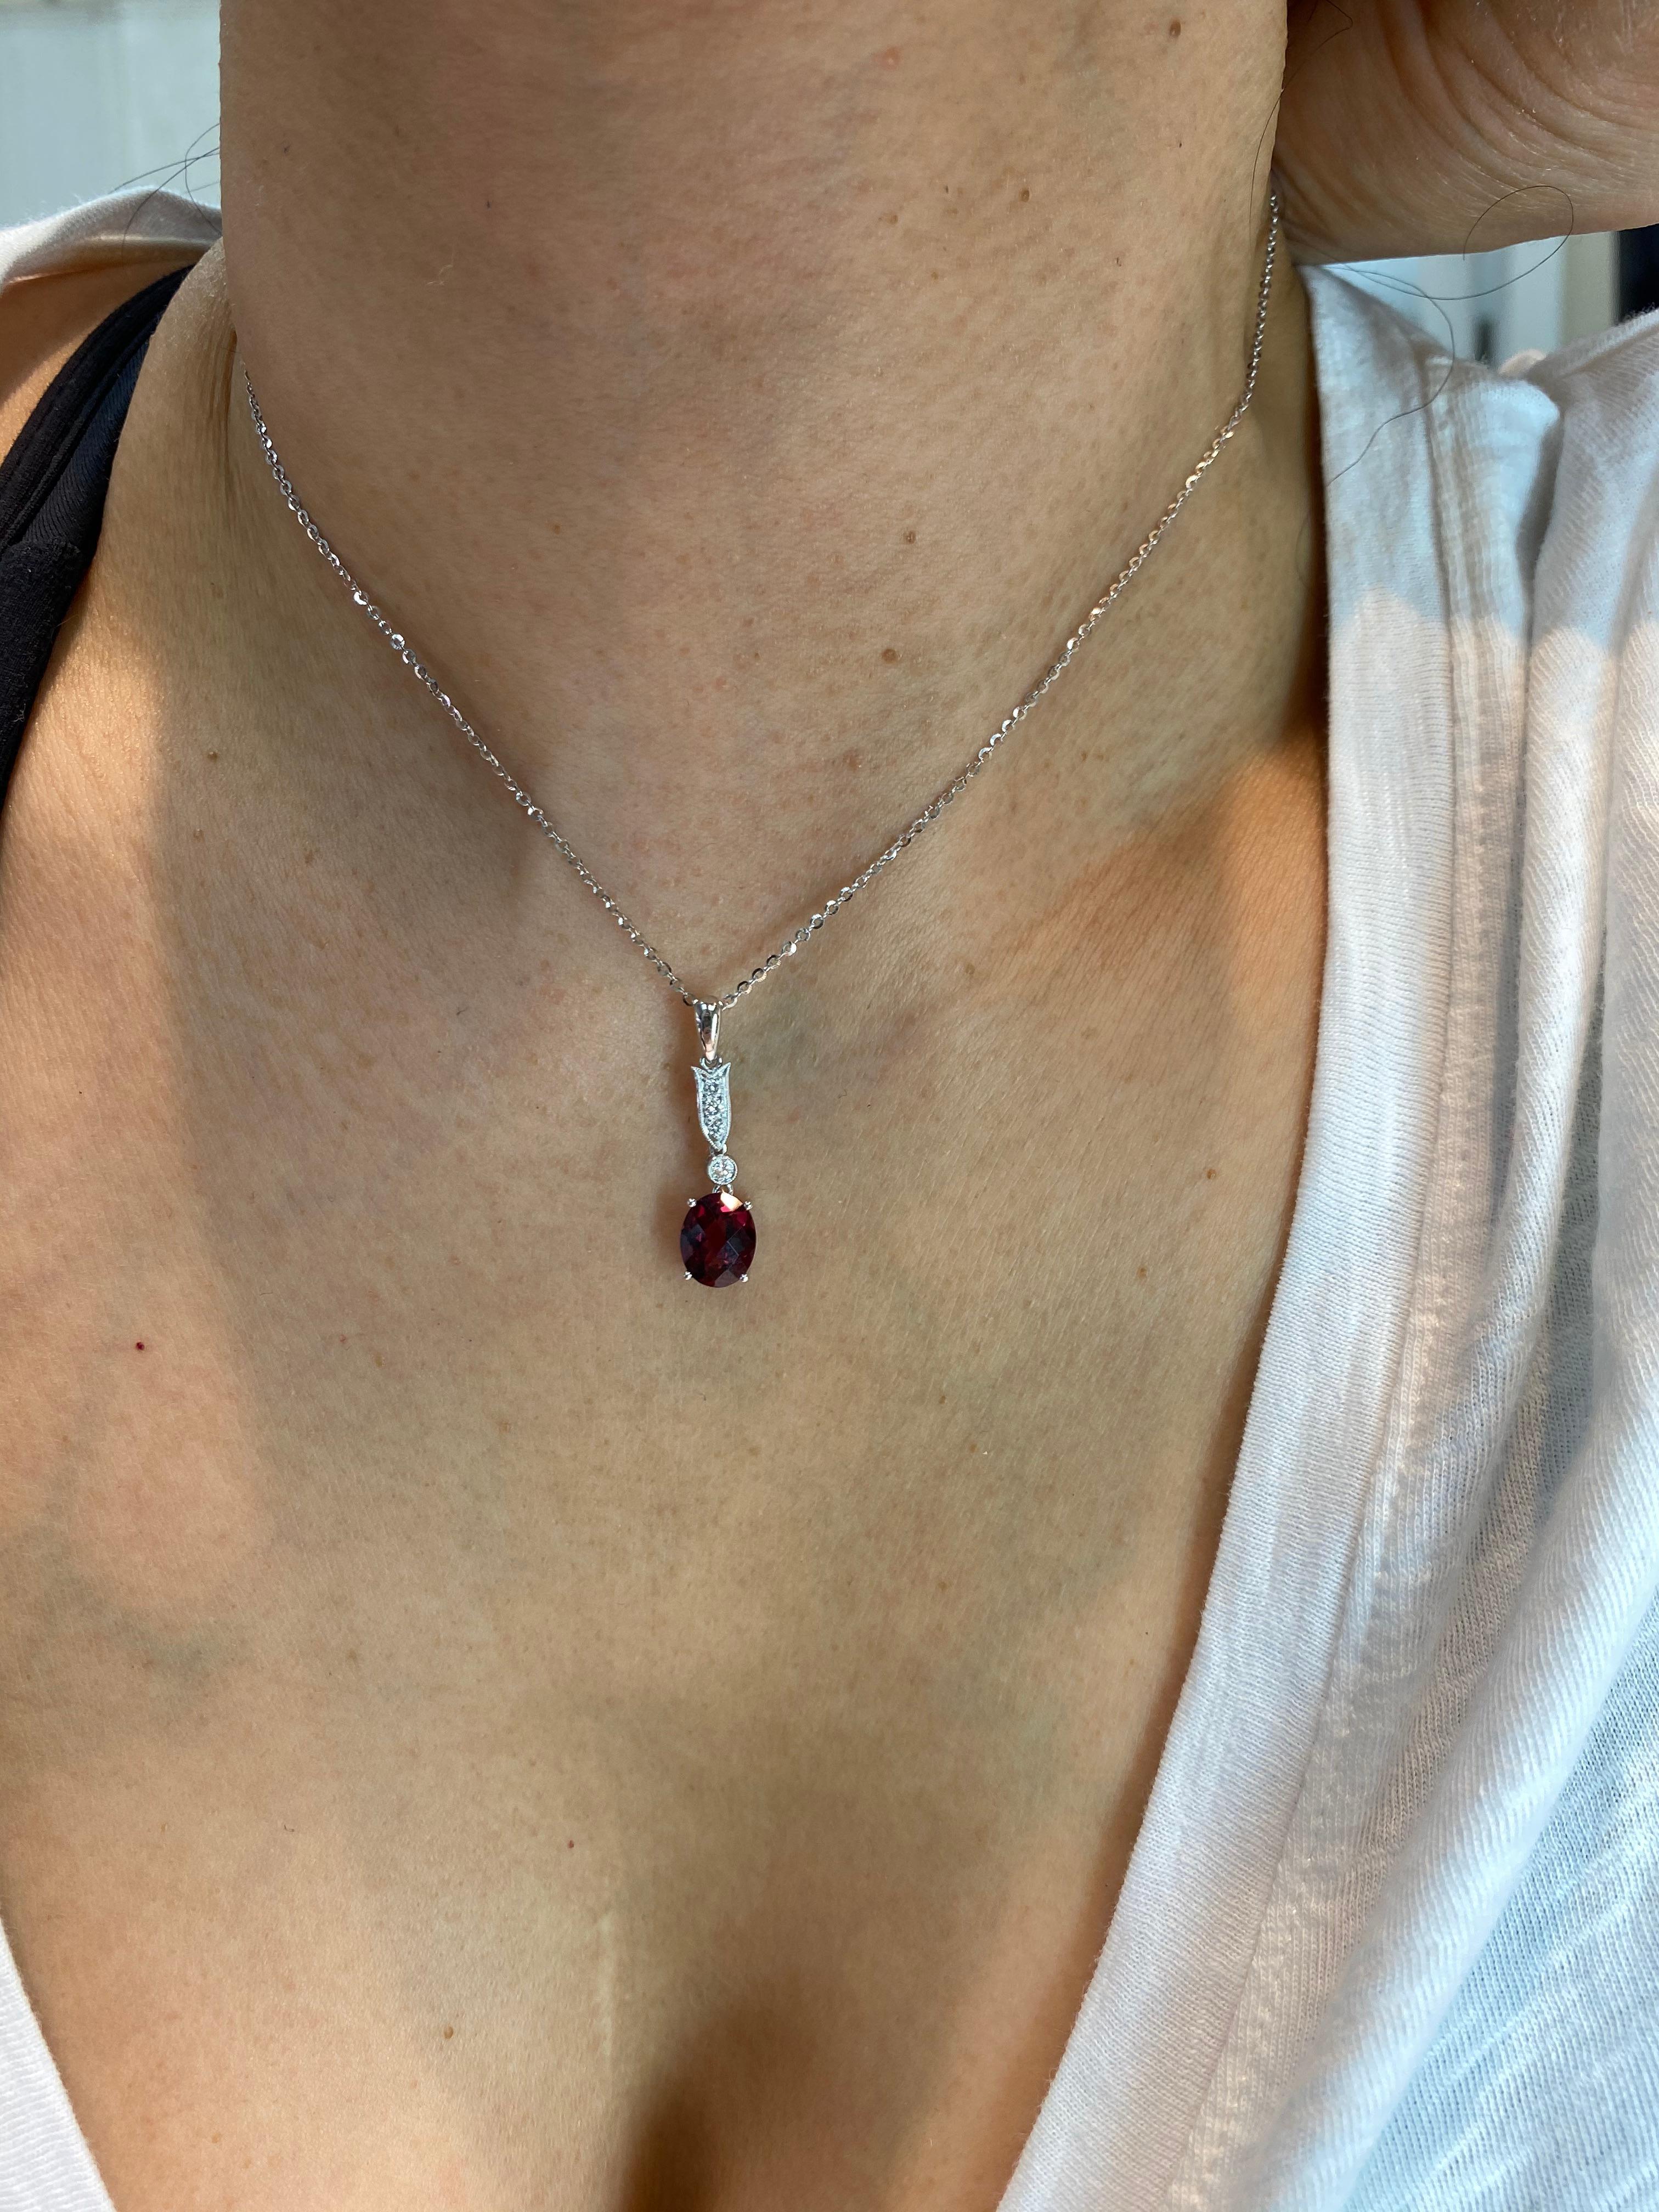 Here is a natural garnet and diamond pendant. The pendant is set in 18k white gold and diamonds. There are estimated 0.08 cts of diamonds set on top of the faceted oval-shaped garnet. The natural garnet is full of life. It sparkles with fire. This